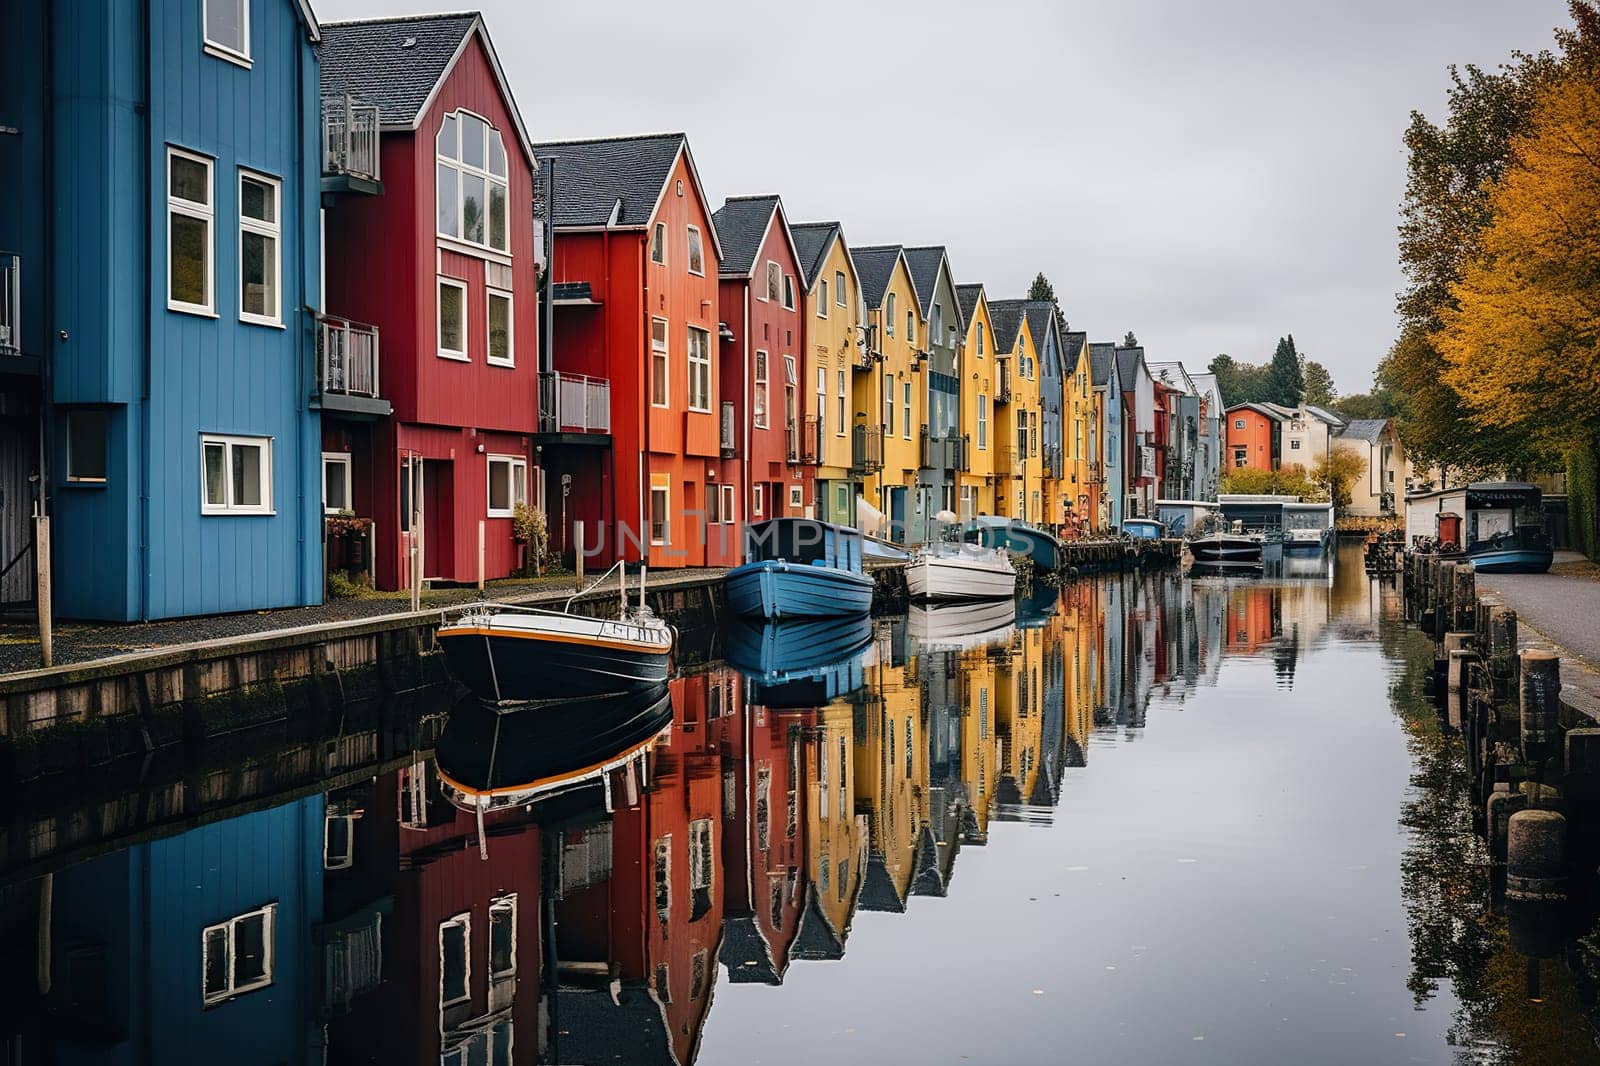 Street with colorful houses in Scandinavian style. Bright houses are reflected in the river.